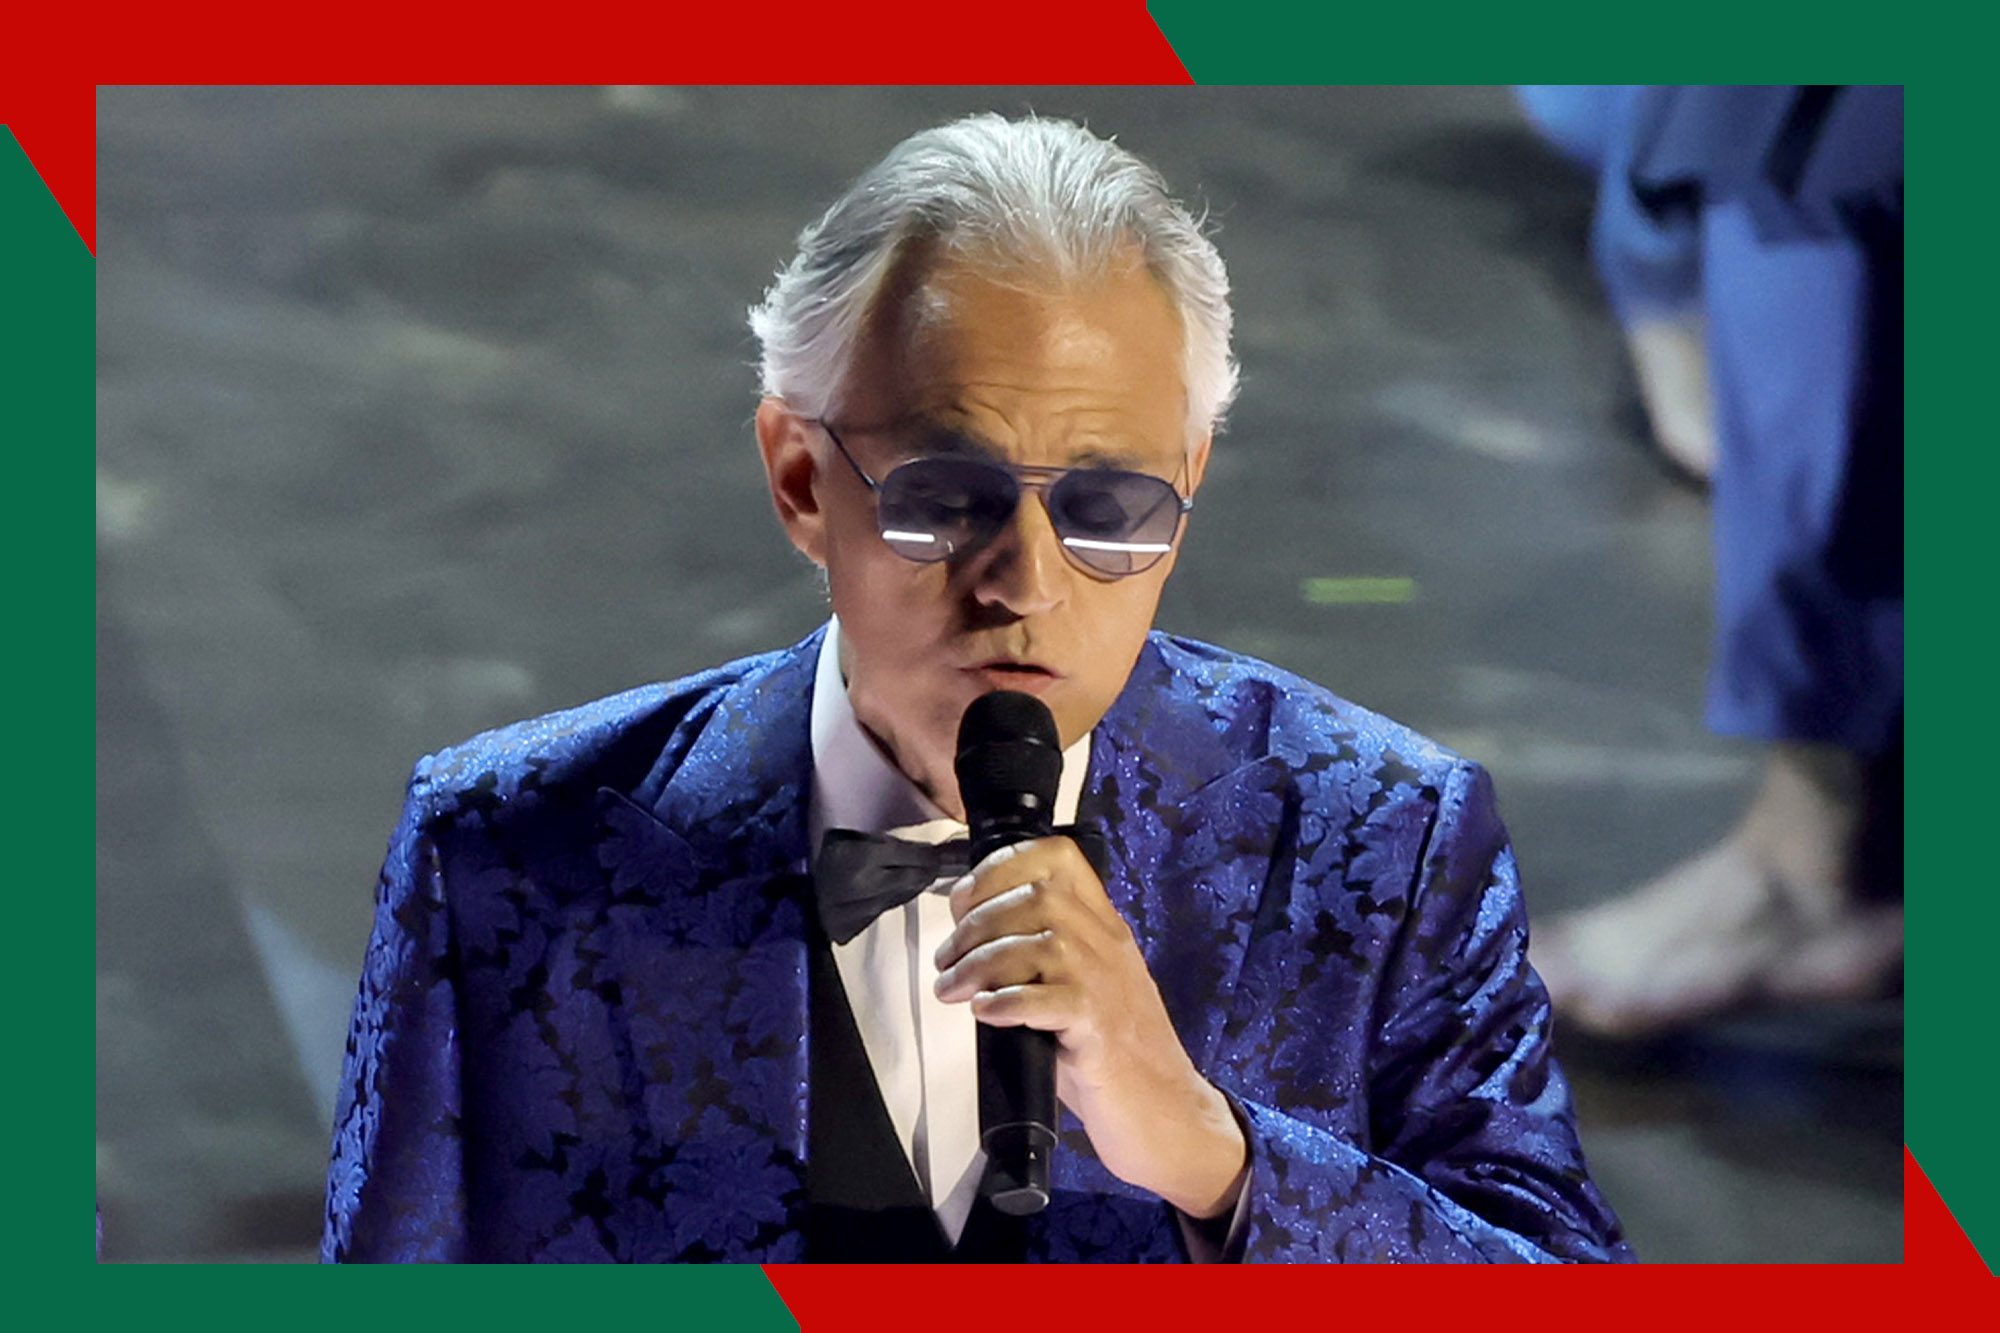 Andrea Bocelli sings with a microphone in hand.